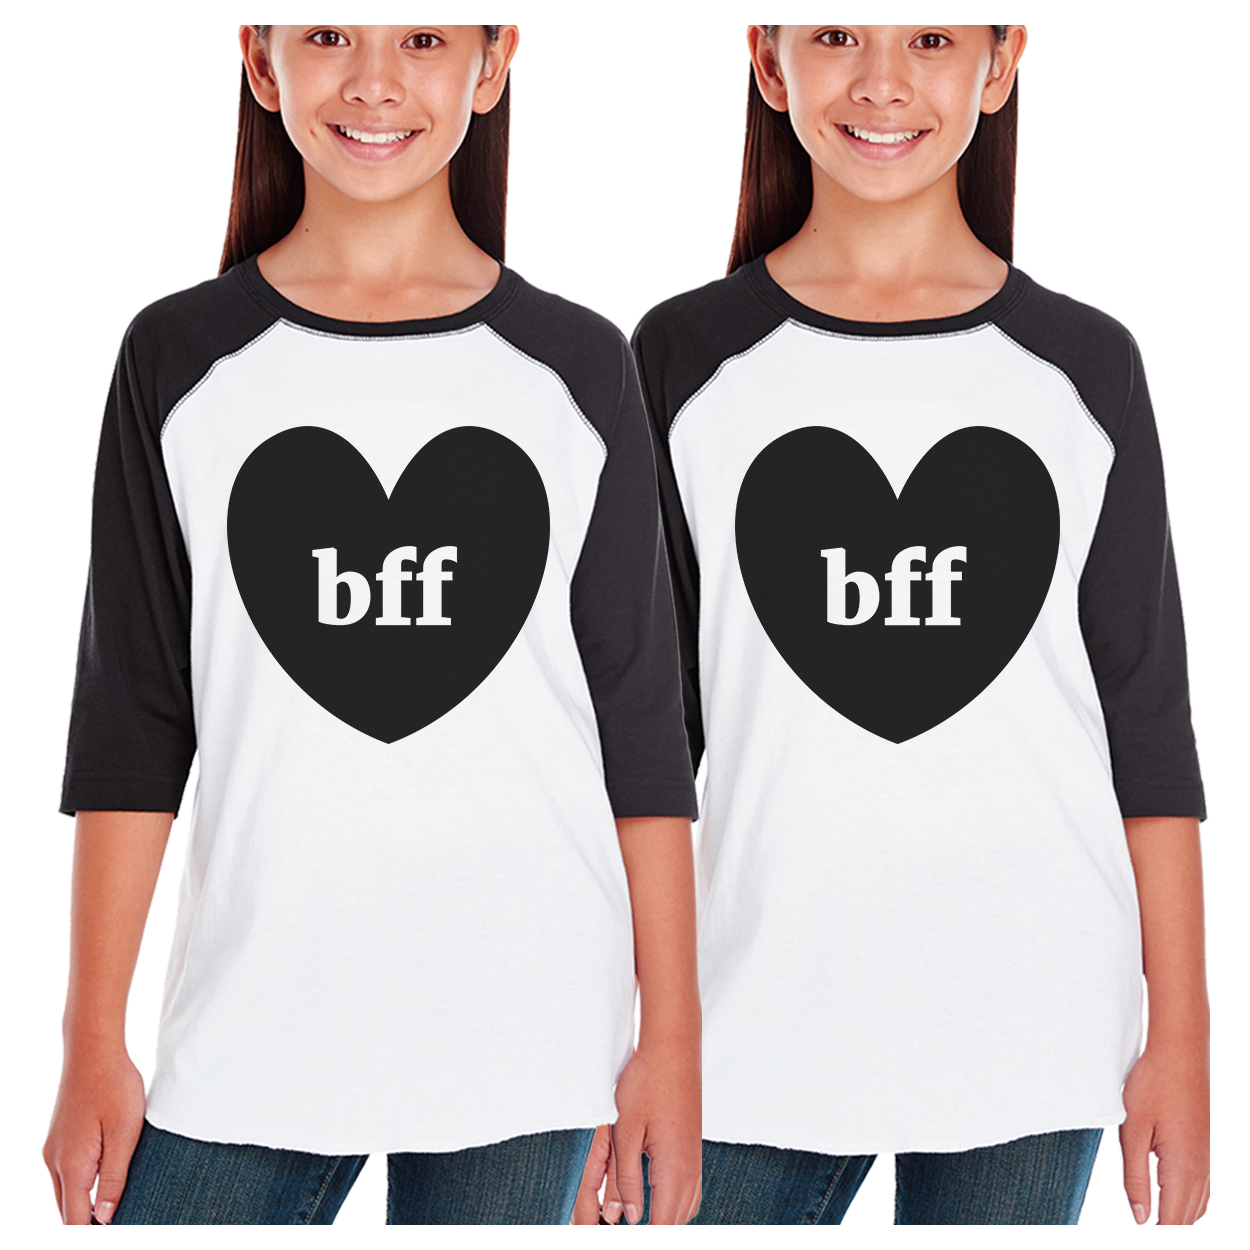 Bff Heart BFF Matching T-Shirts Funny Graphic Baseball Tees Gifts - image 1 of 4